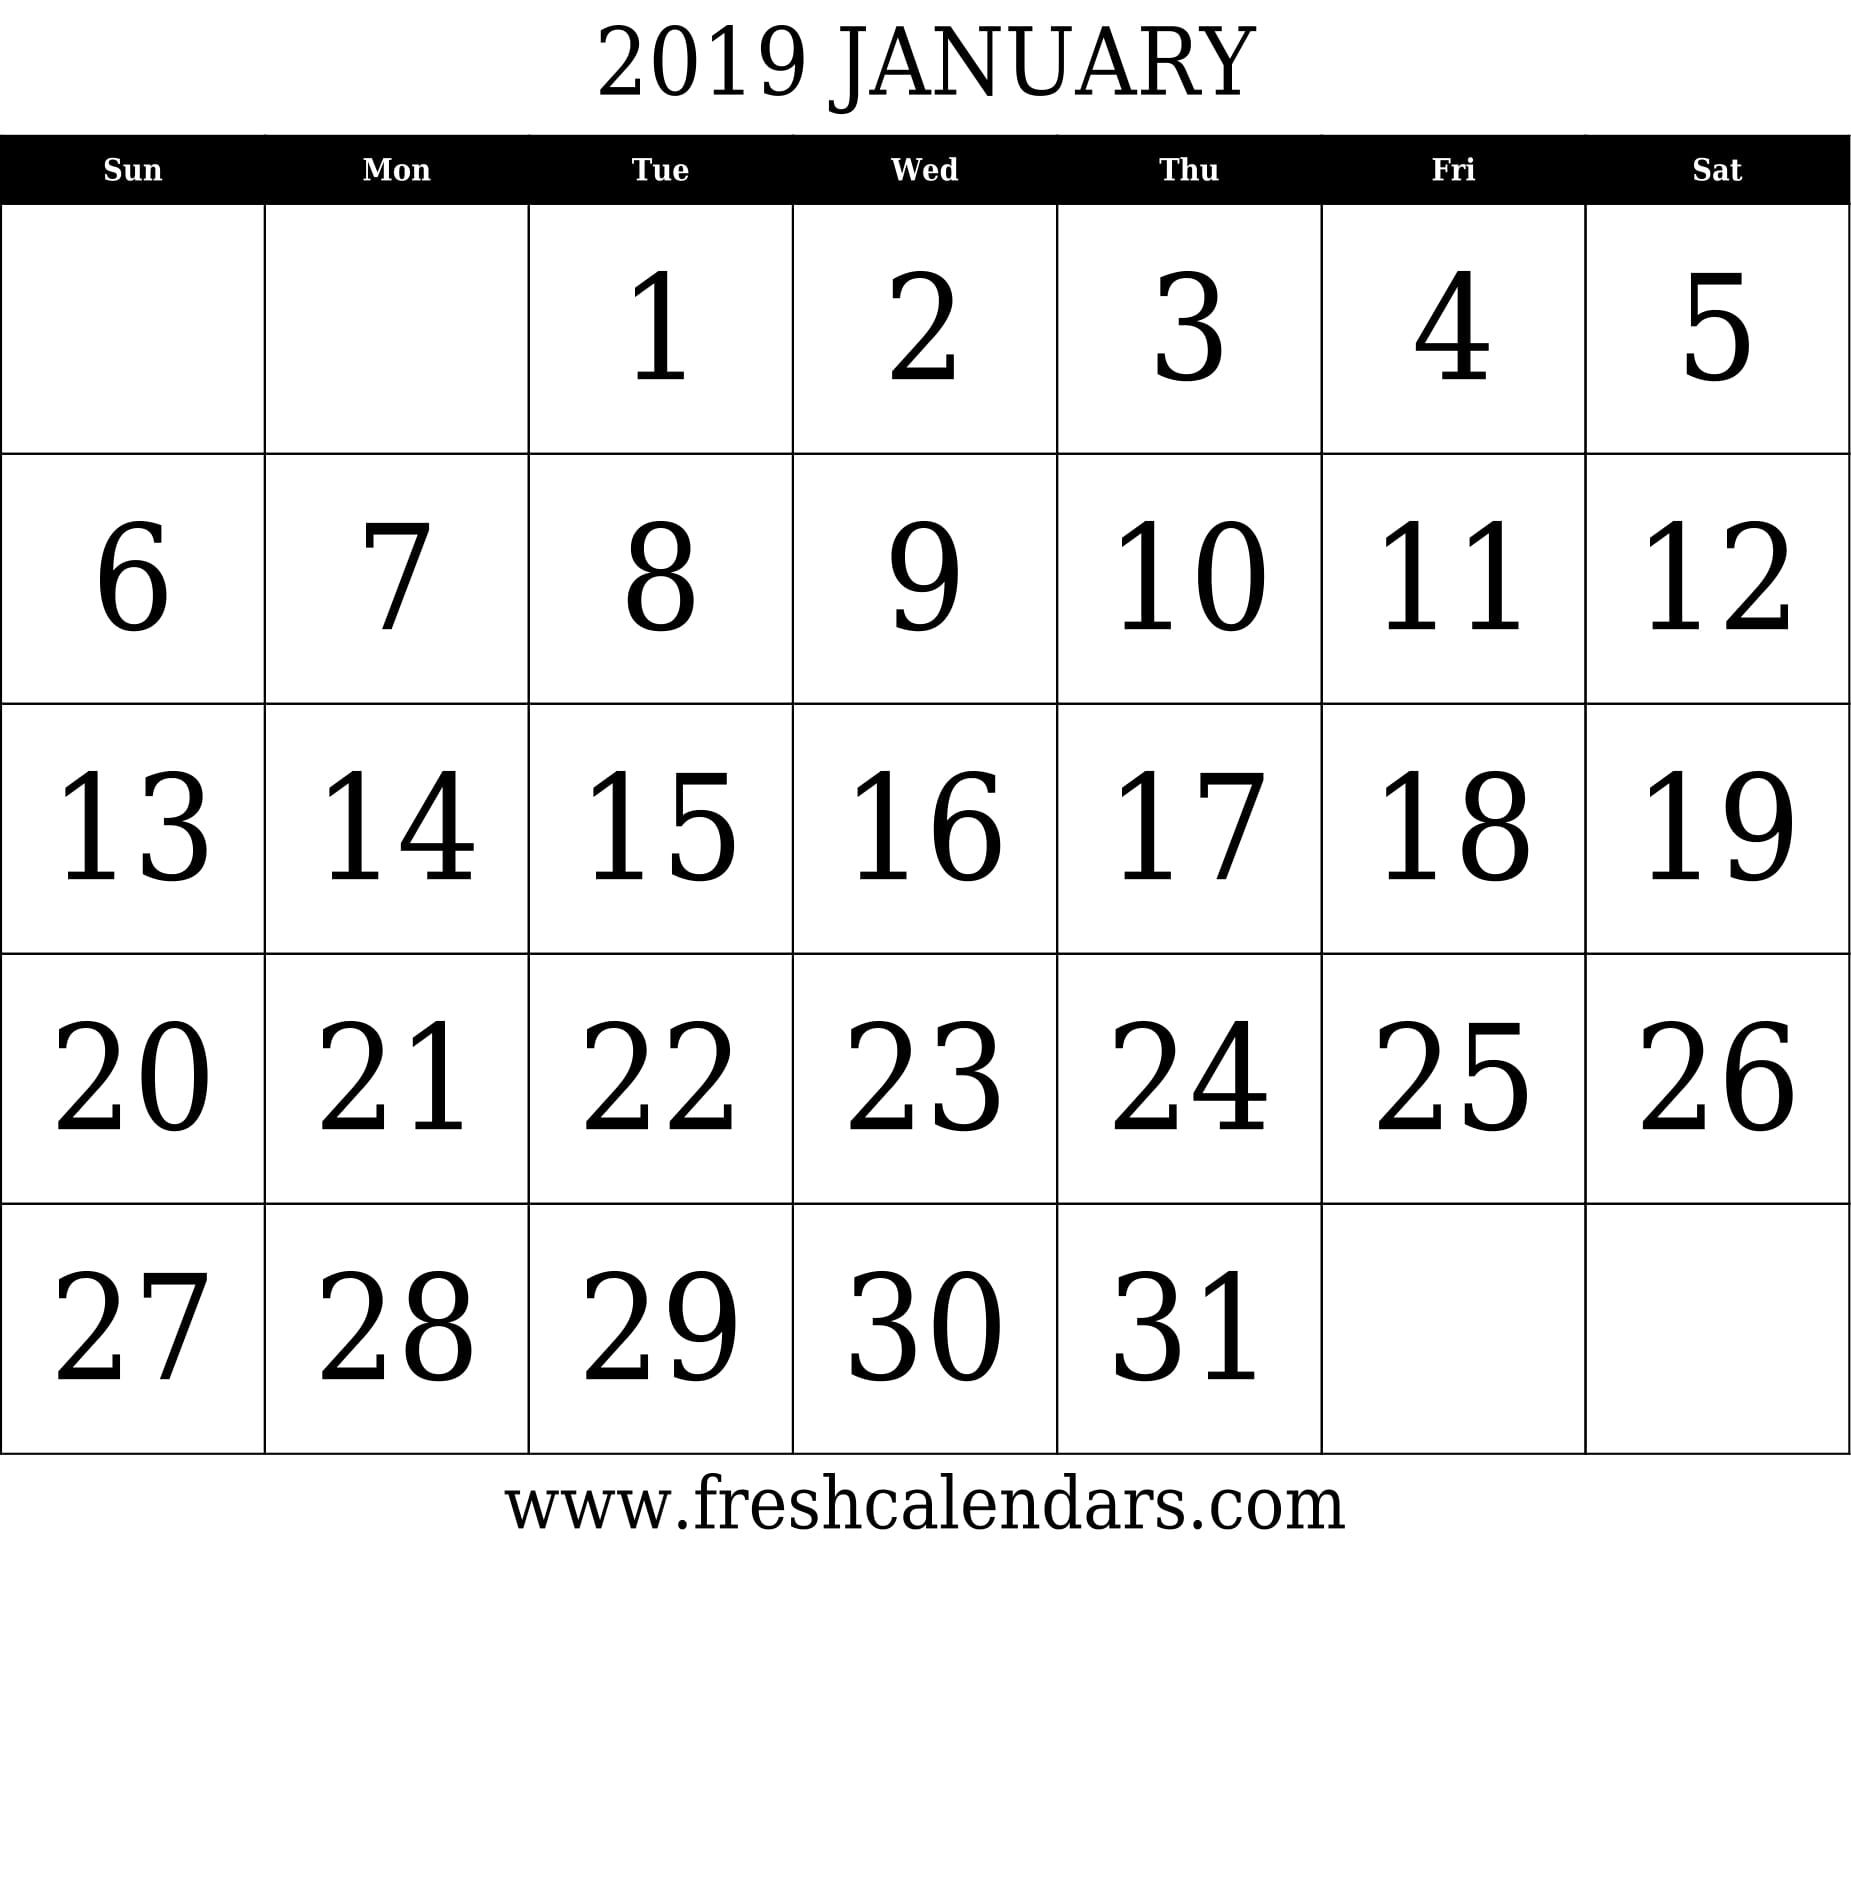 January 2019 Calendar With Large Dates